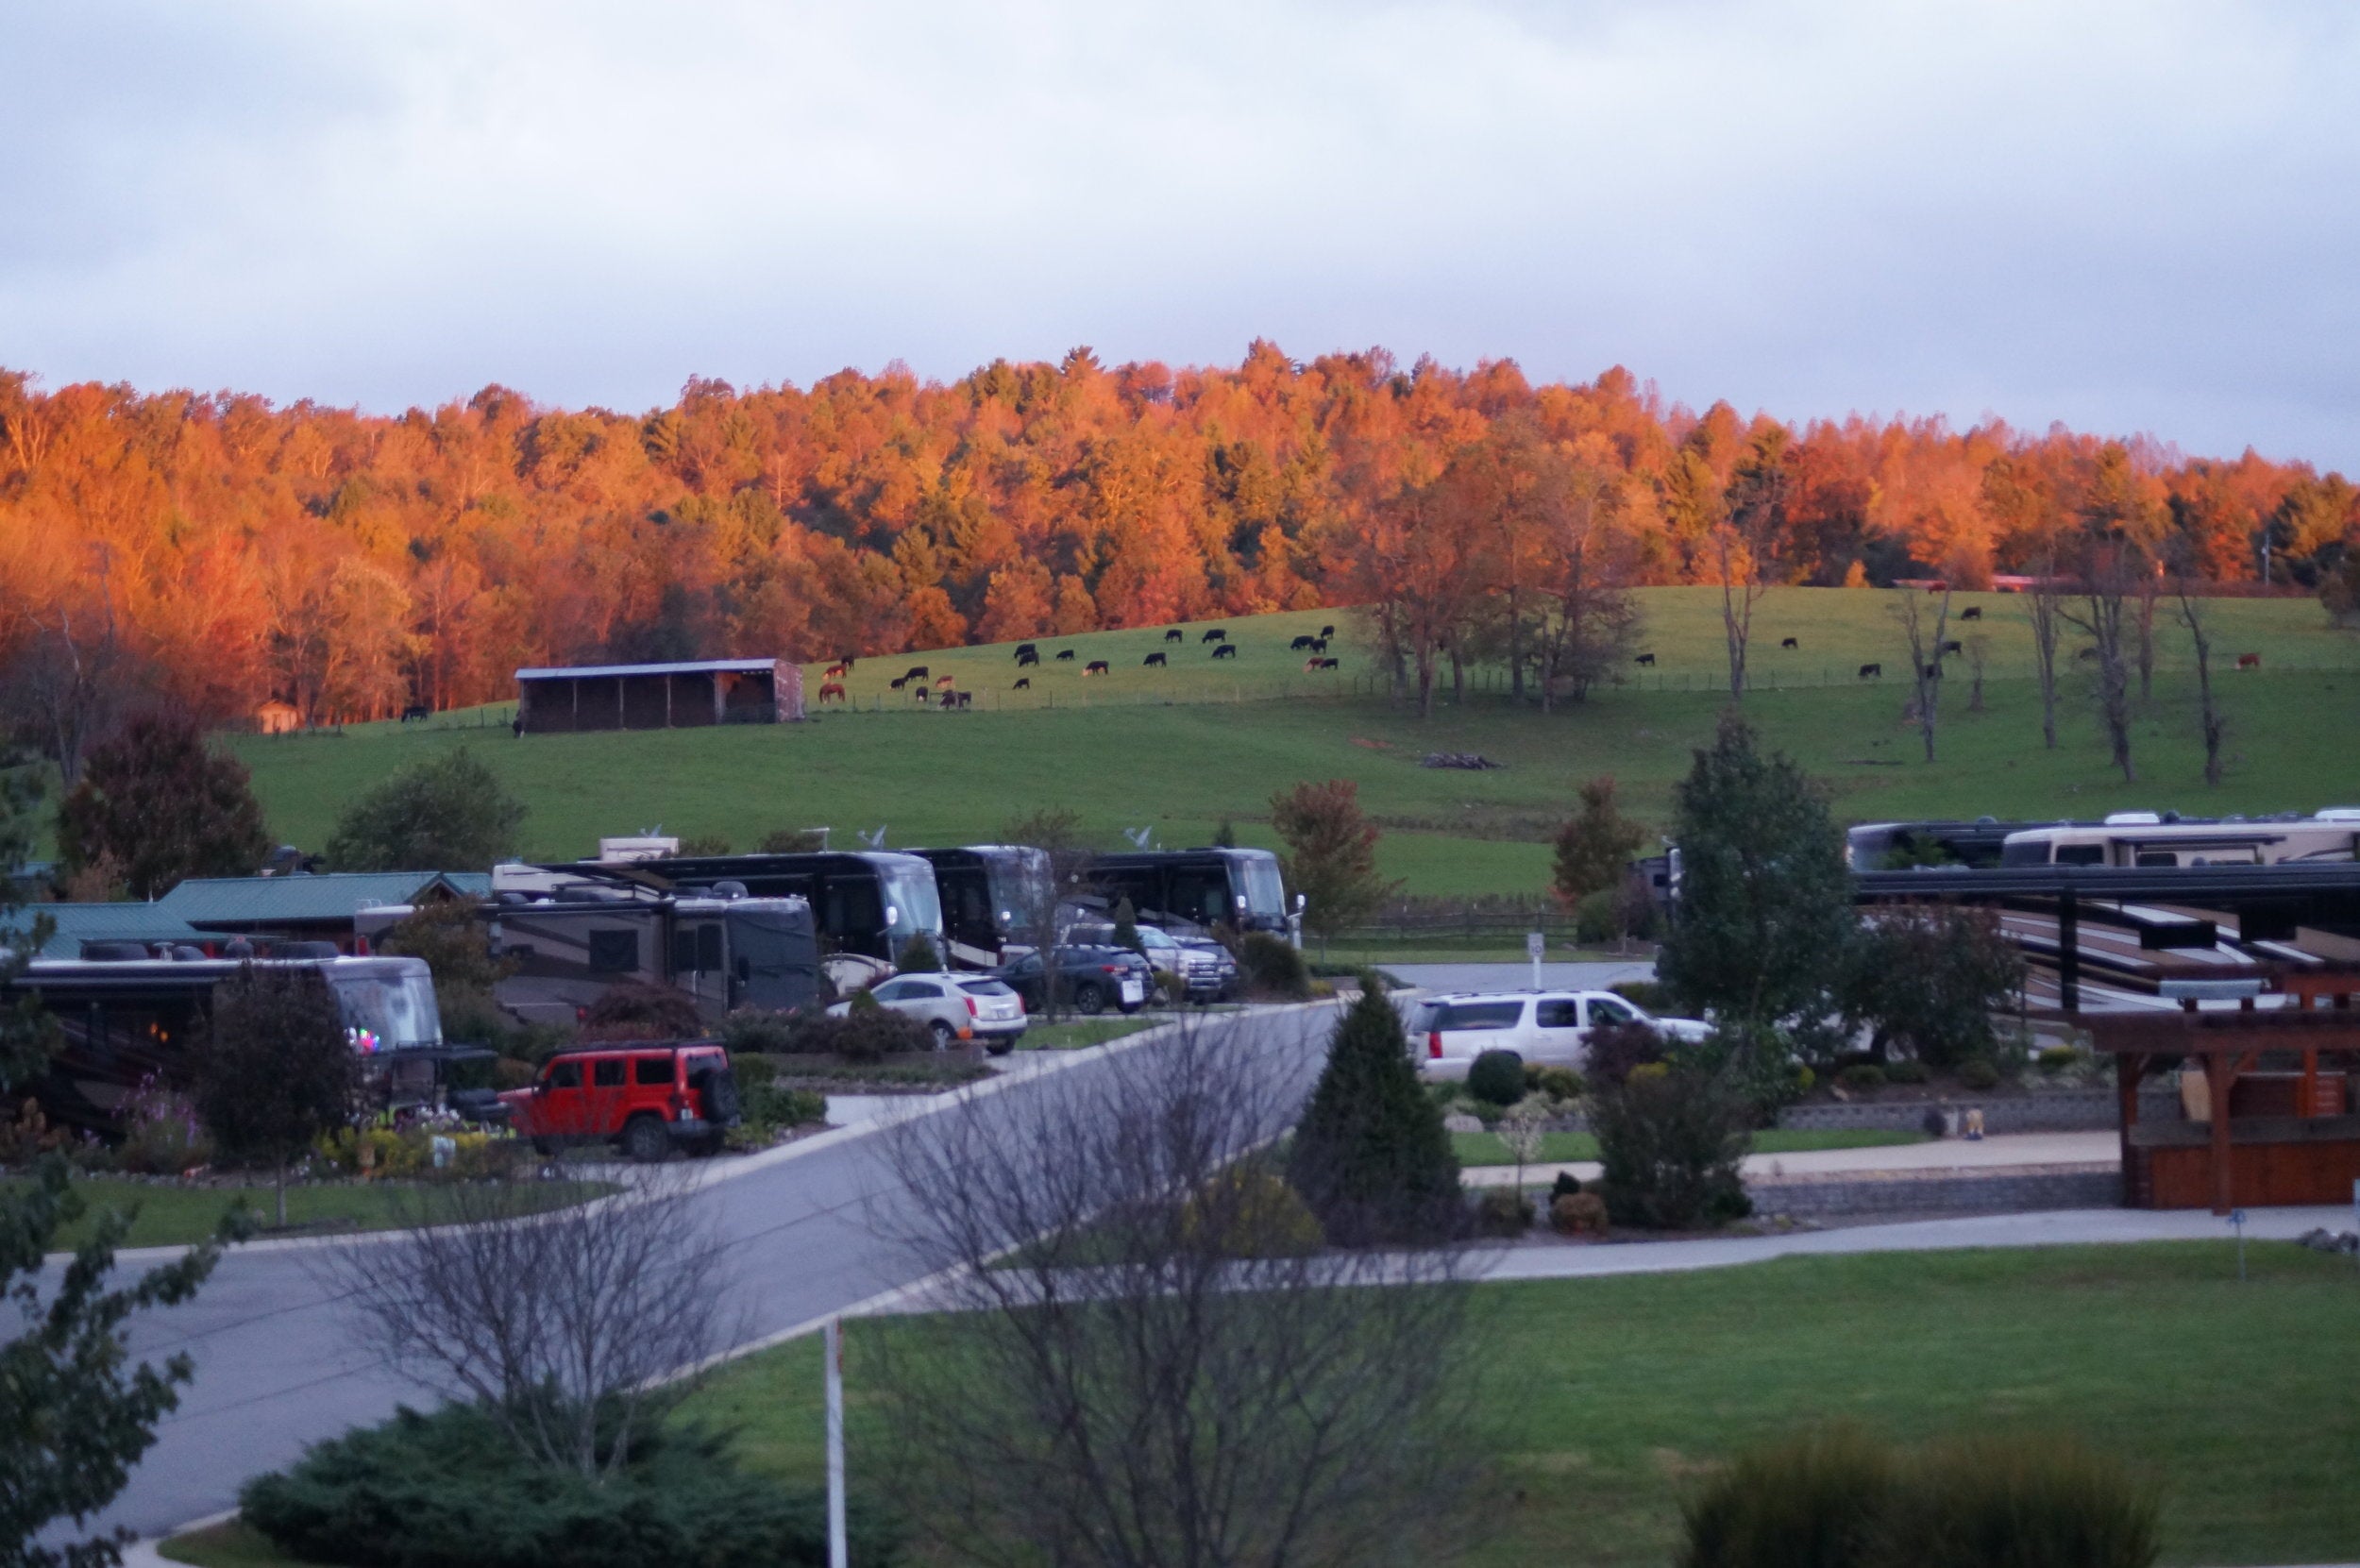 Camper submitted image from Deer Creek Motorcoach Resort - 2